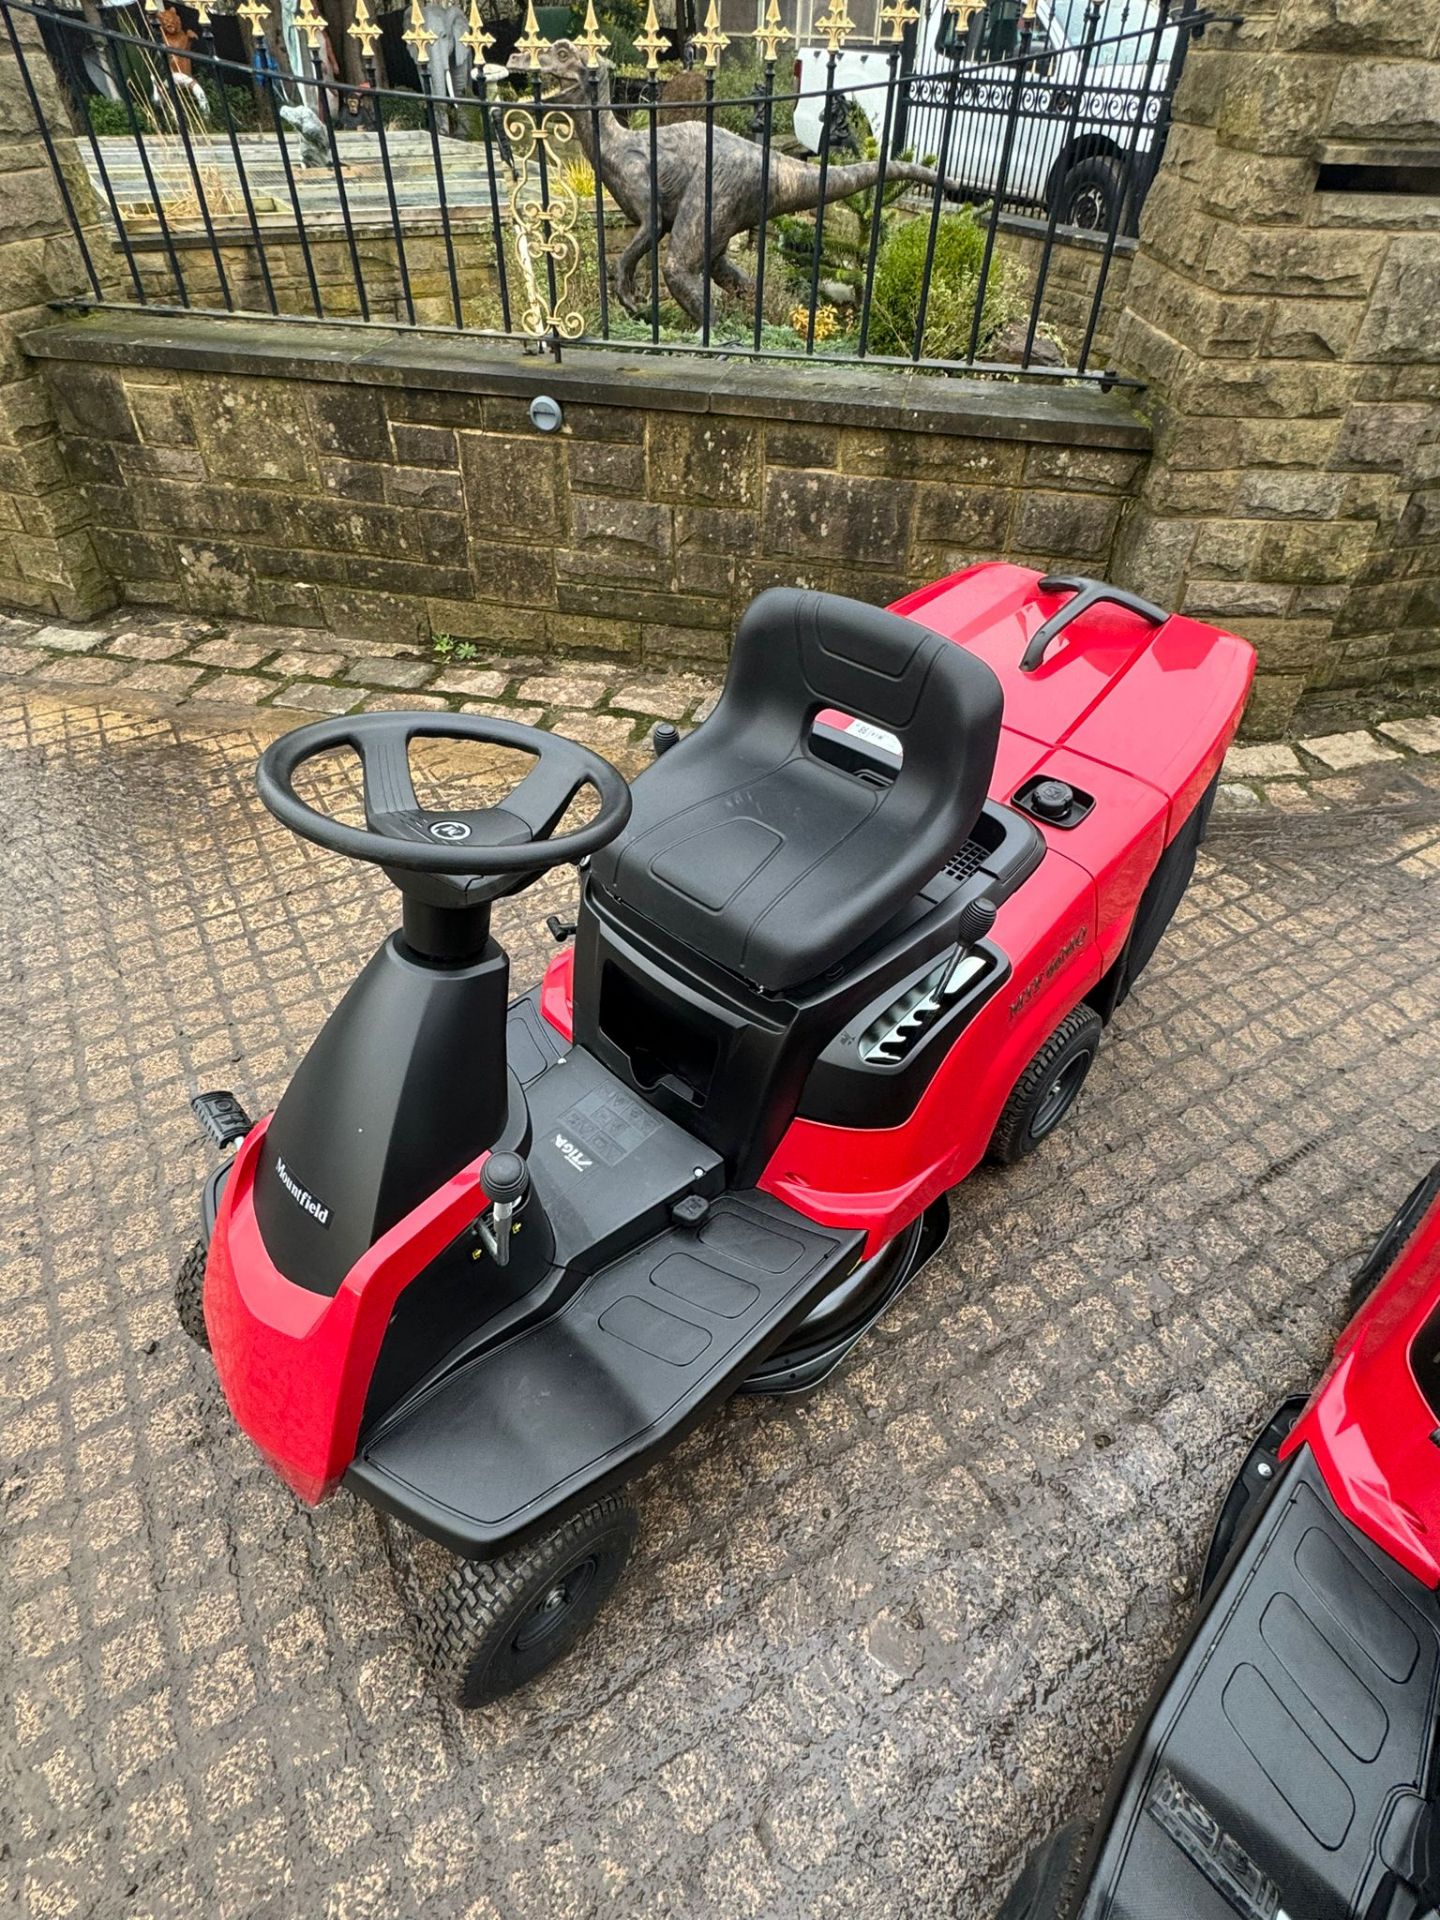 NEW/UNUSED MOUNTFIELD MTF 66 MQ RIDE ON MOWER WITH REAR COLLECTOR *PLUS VAT* - Image 2 of 11